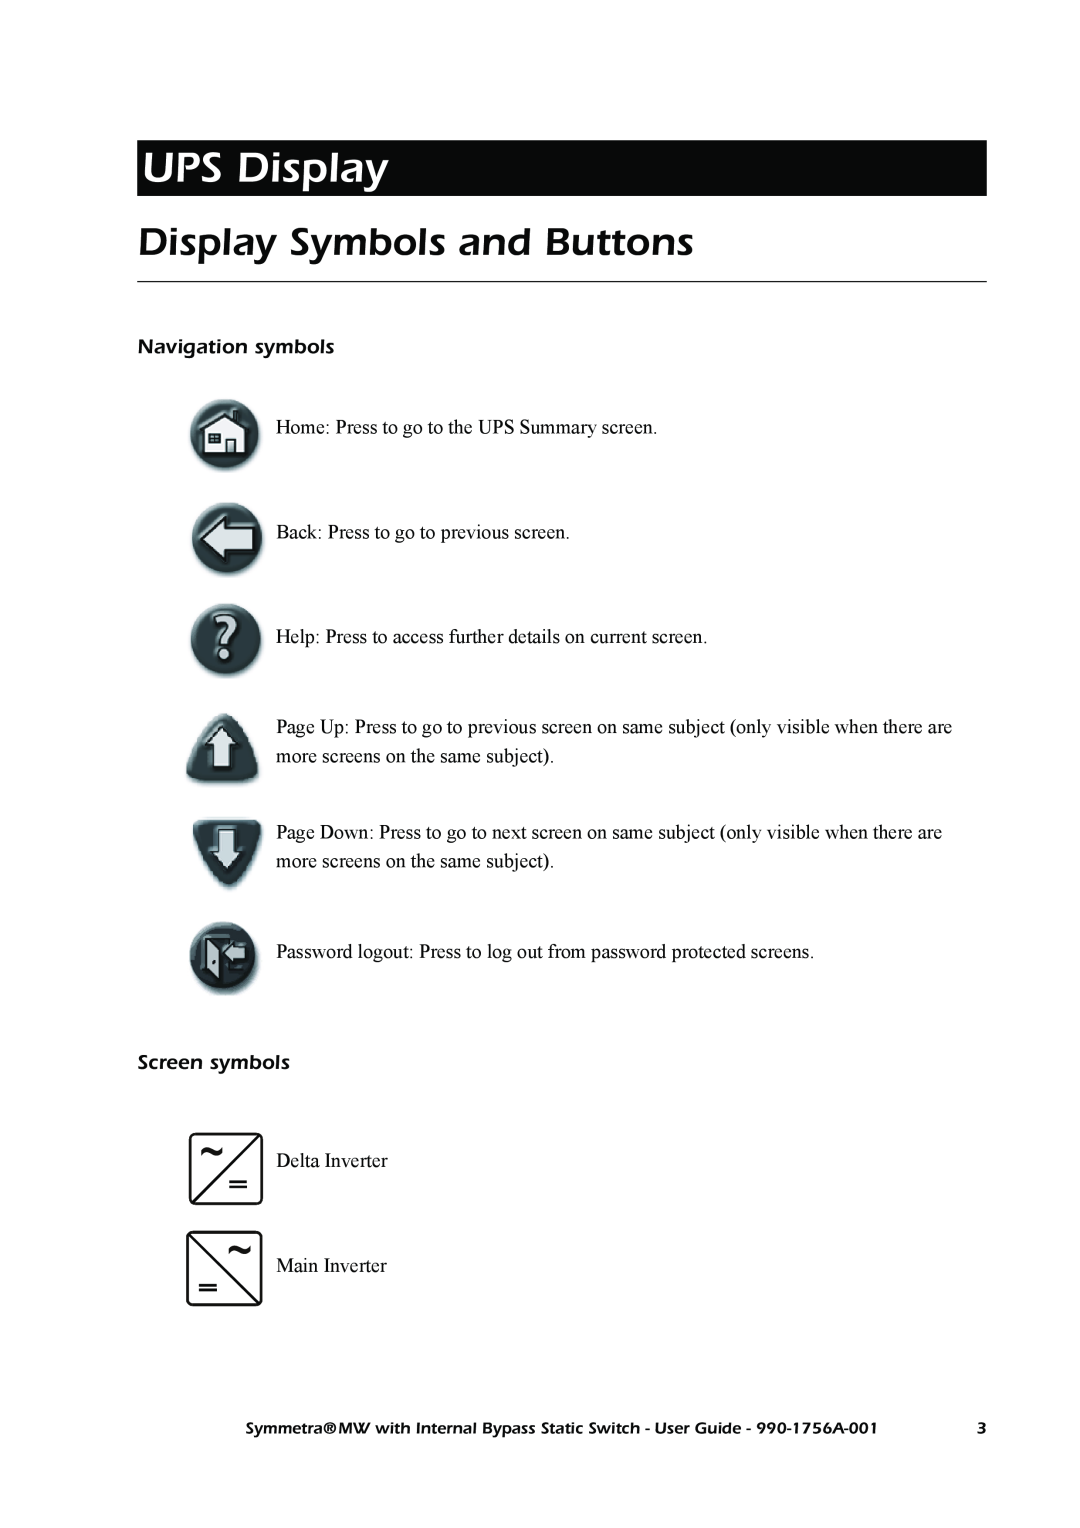 American Power Conversion Bypass Static manual UPS Display, Display Symbols and Buttons 